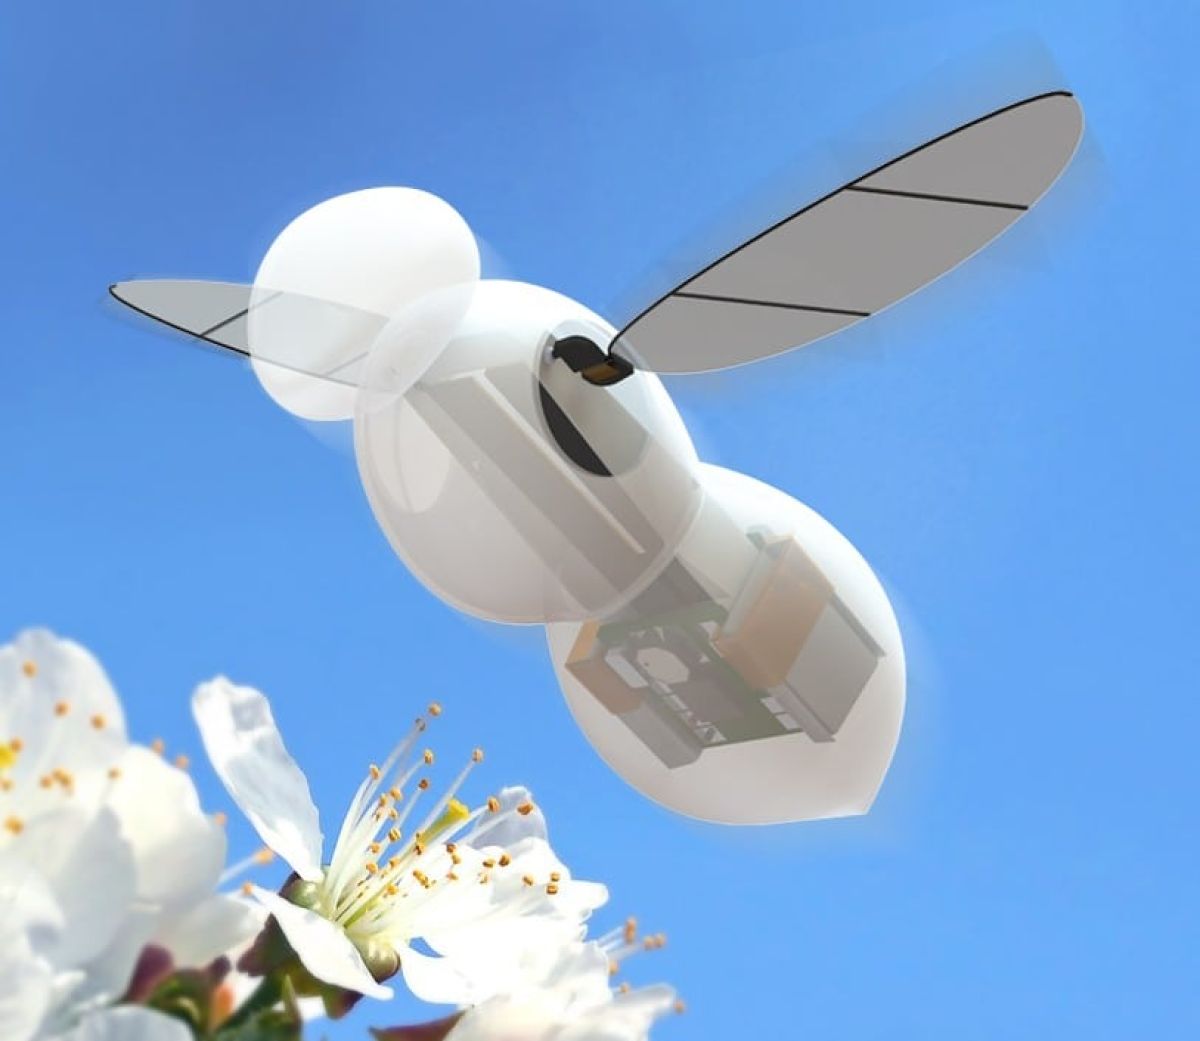 Micro-robots: flying bees and jumping spiders